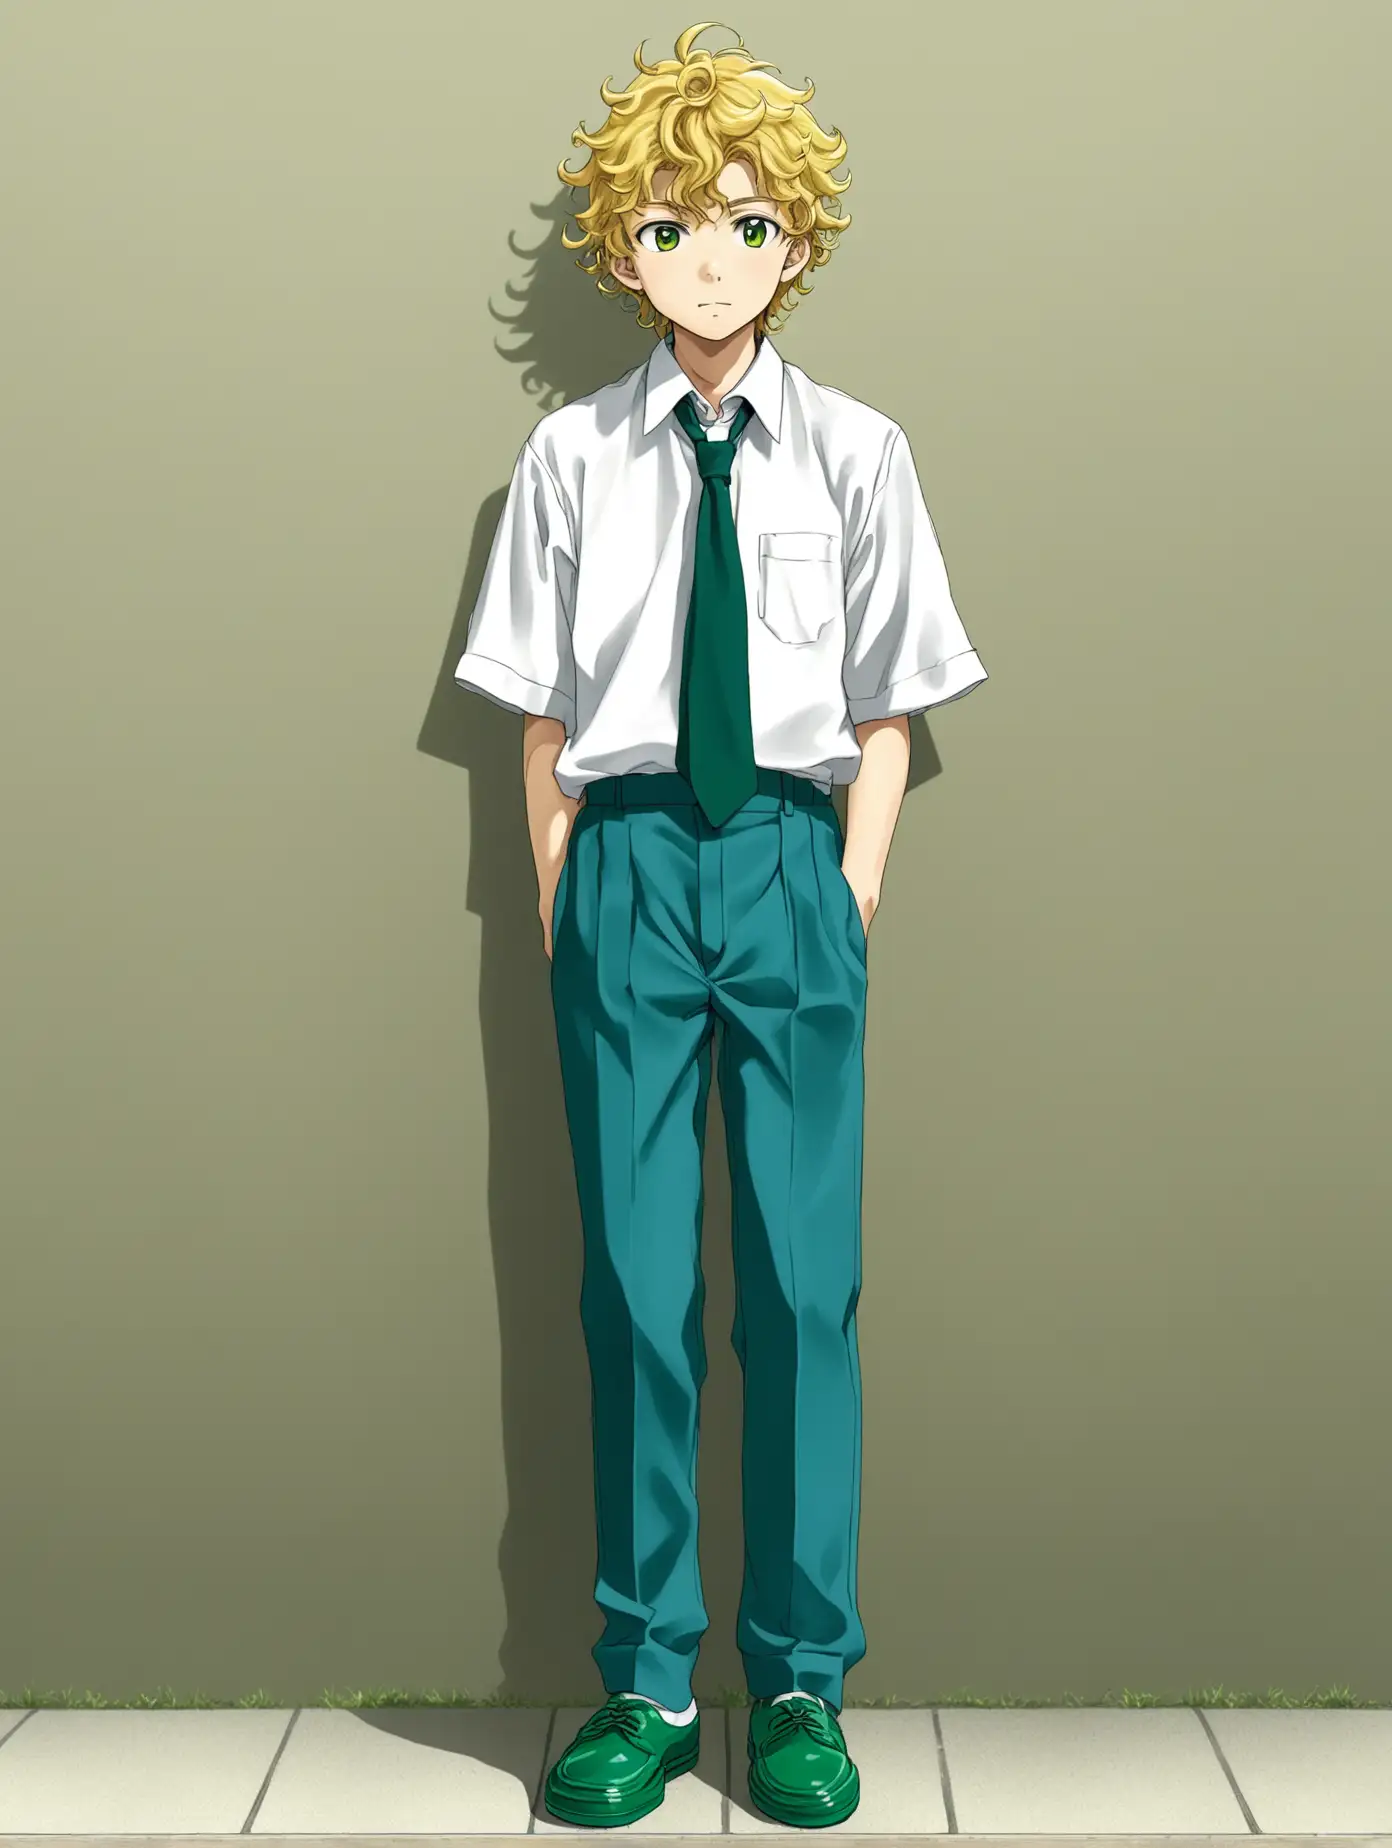 Japanese-Boy-in-School-Uniform-with-Curly-Yellow-Hair-and-Green-Shoes